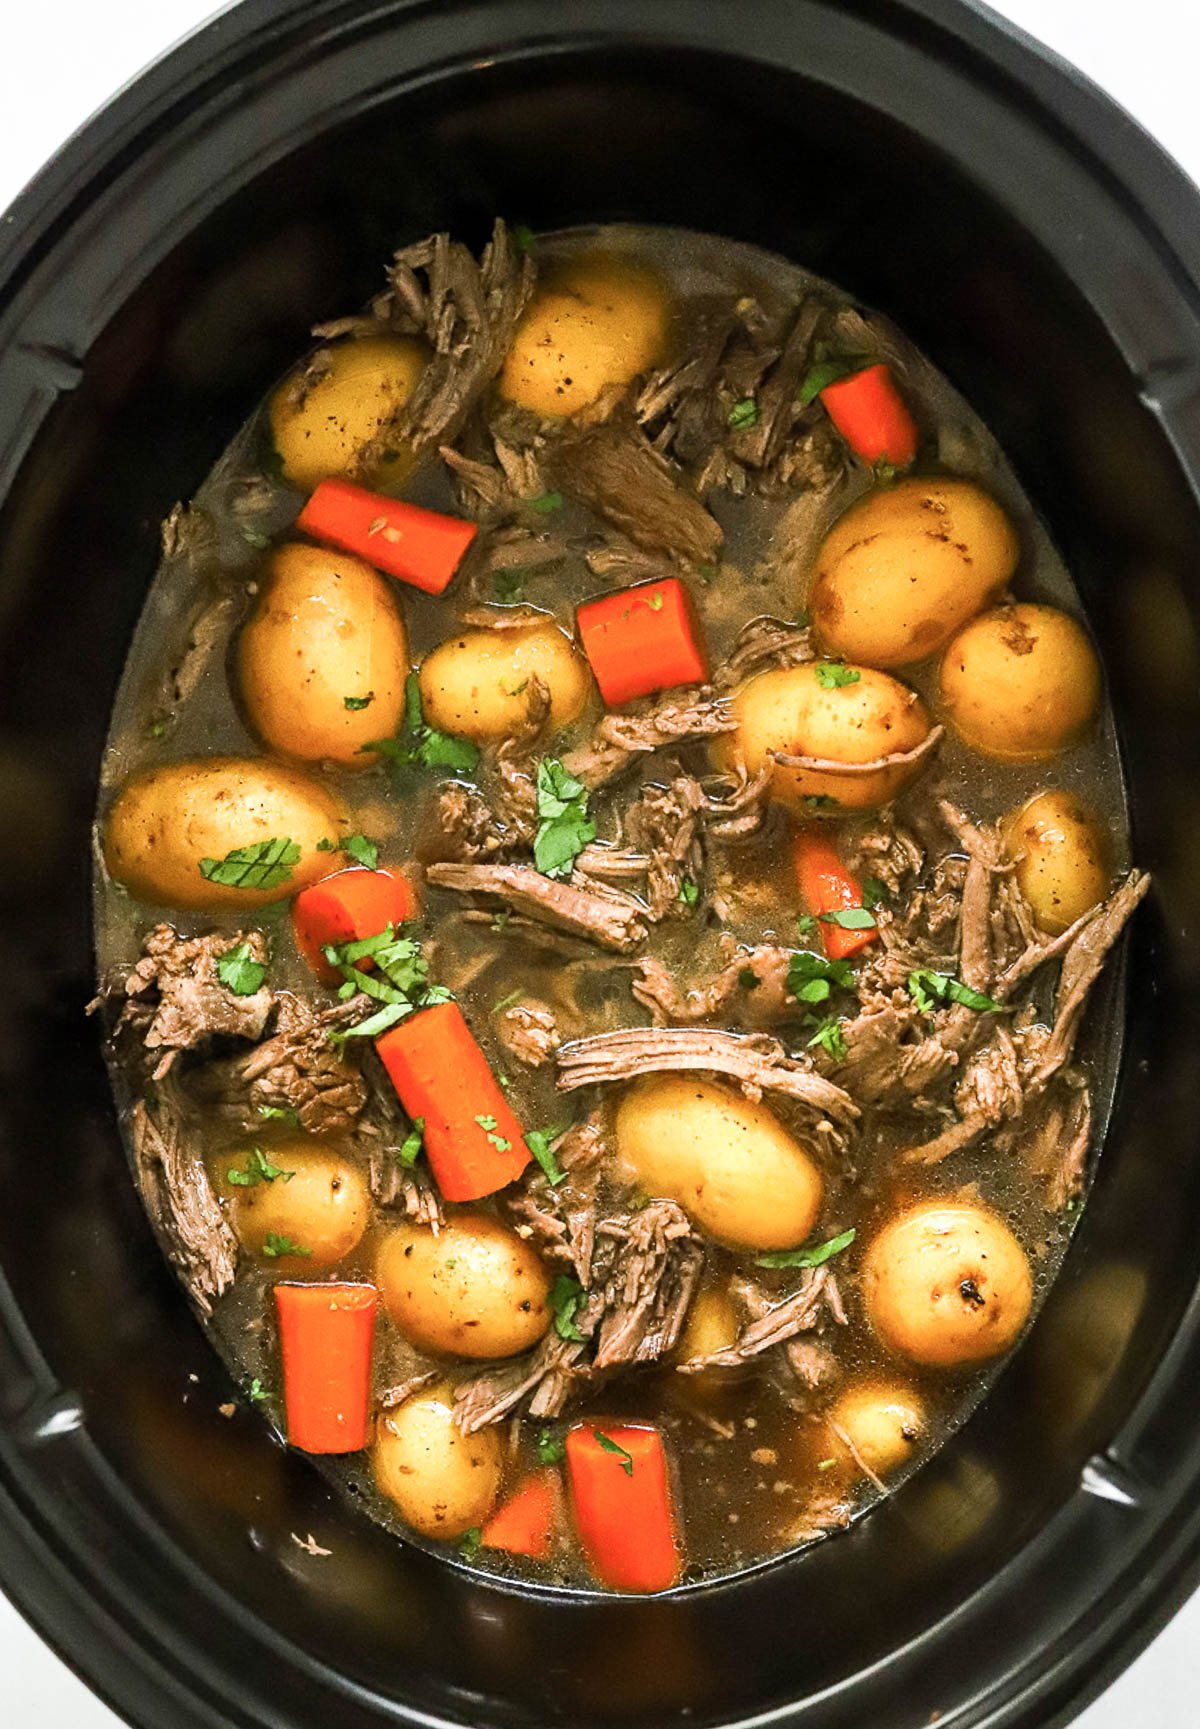 Shredded rump roast in crock pot with baby potatoes and carrots in broth and garnished with parsley.